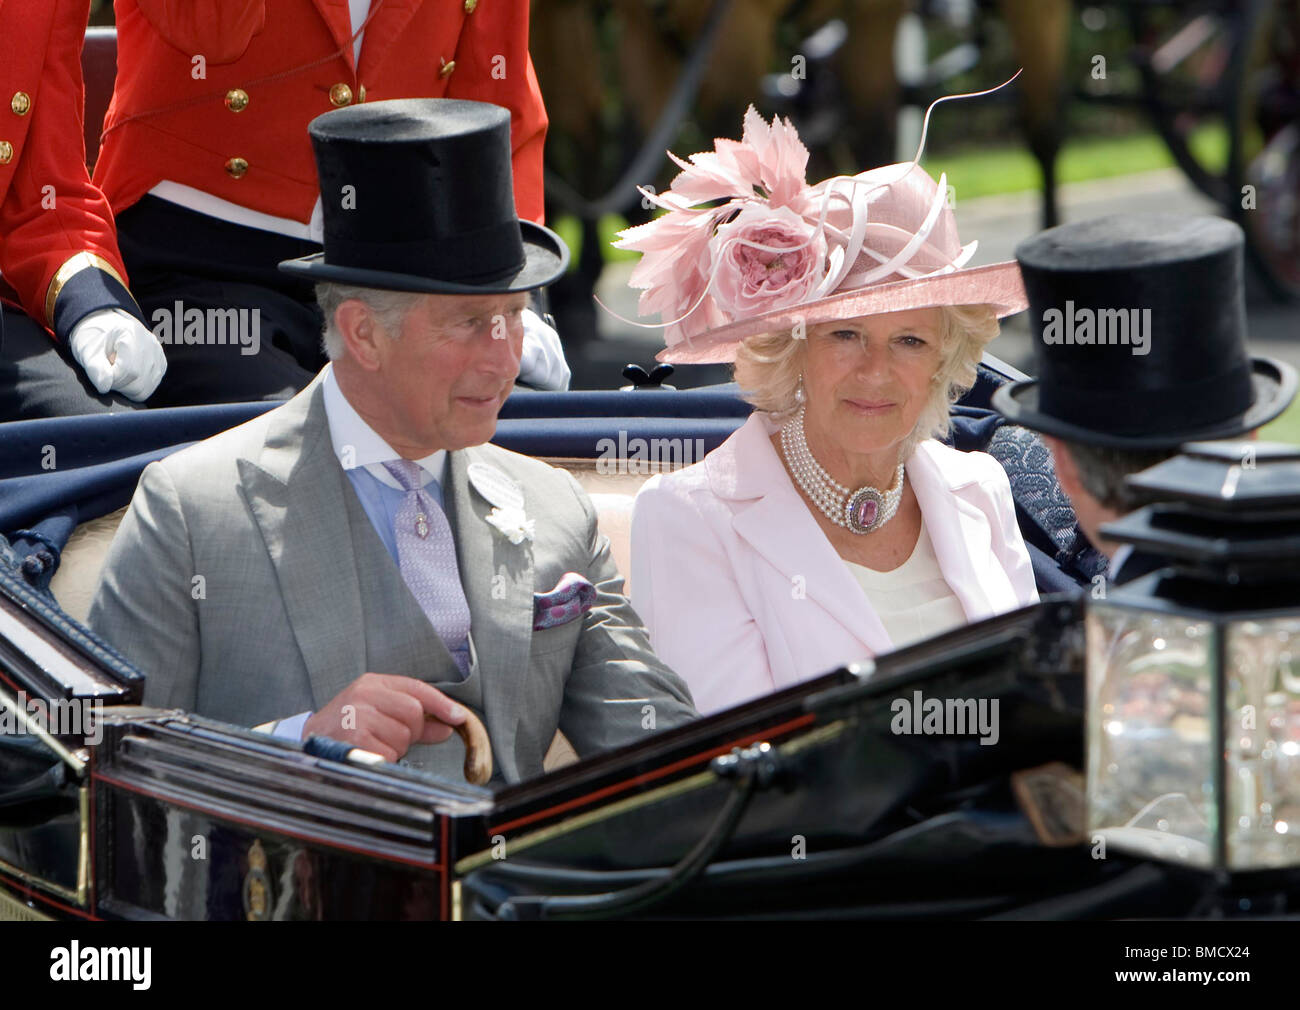 Britain's Prince Charles and Camilla Duchess of Cornwall arrive in a carriage to the Royal Ascot race meeting in 2009 Stock Photo